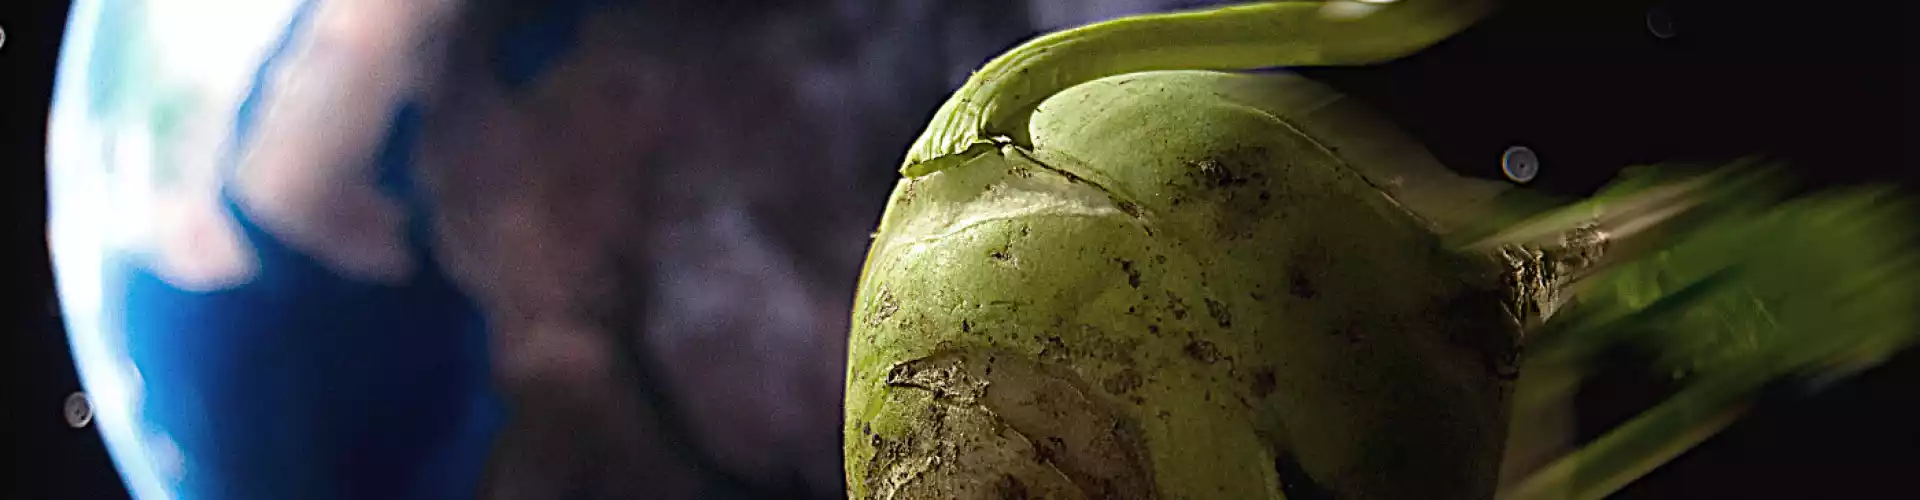 10 Out-of-This-World Fruits and Veg to Try